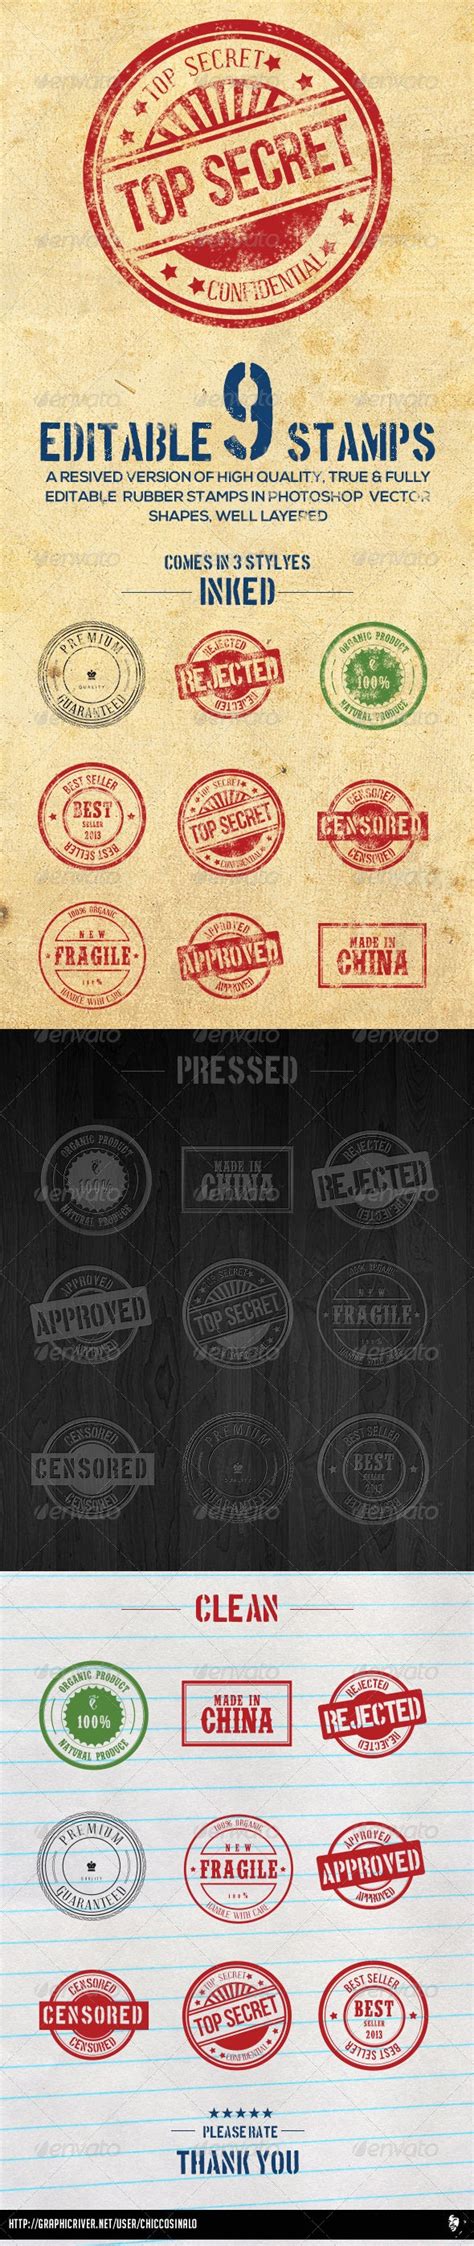 9 Editable Photoshop Rubber Stamps By Chiccosinalo Graphicriver